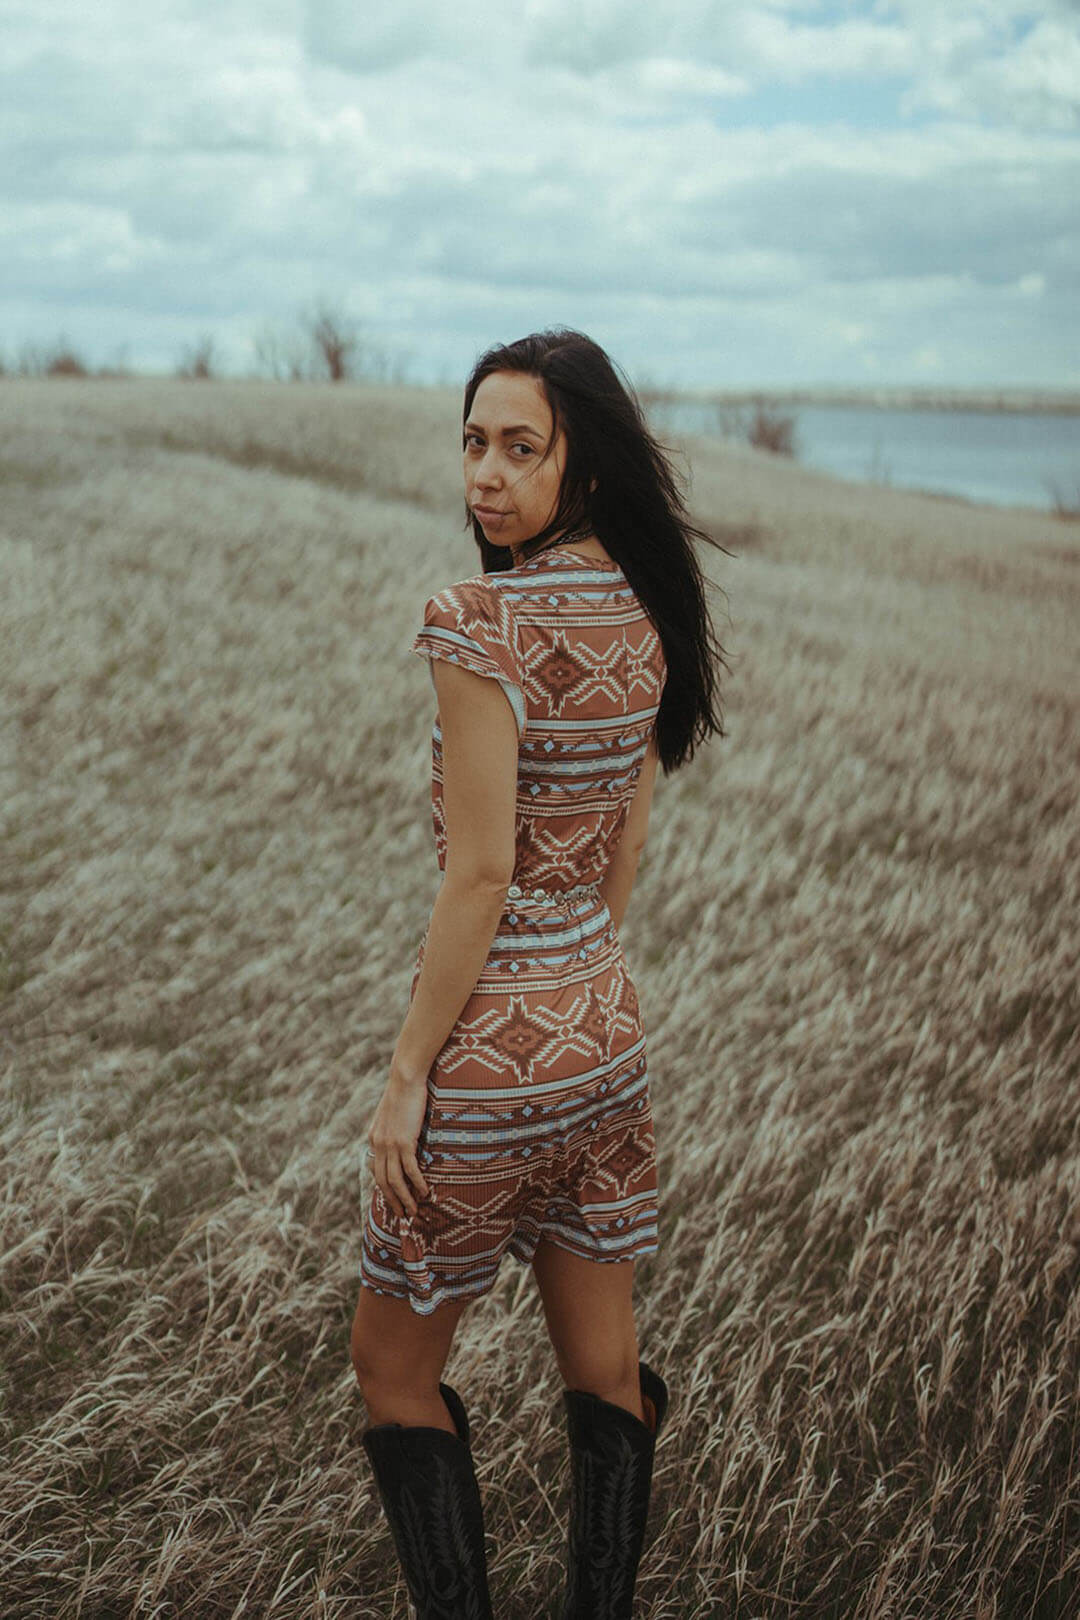 Woman standing in field wearing the Camel Aztec Ribbed Dress.  The dress has colors of browns, tans, and light blue.  